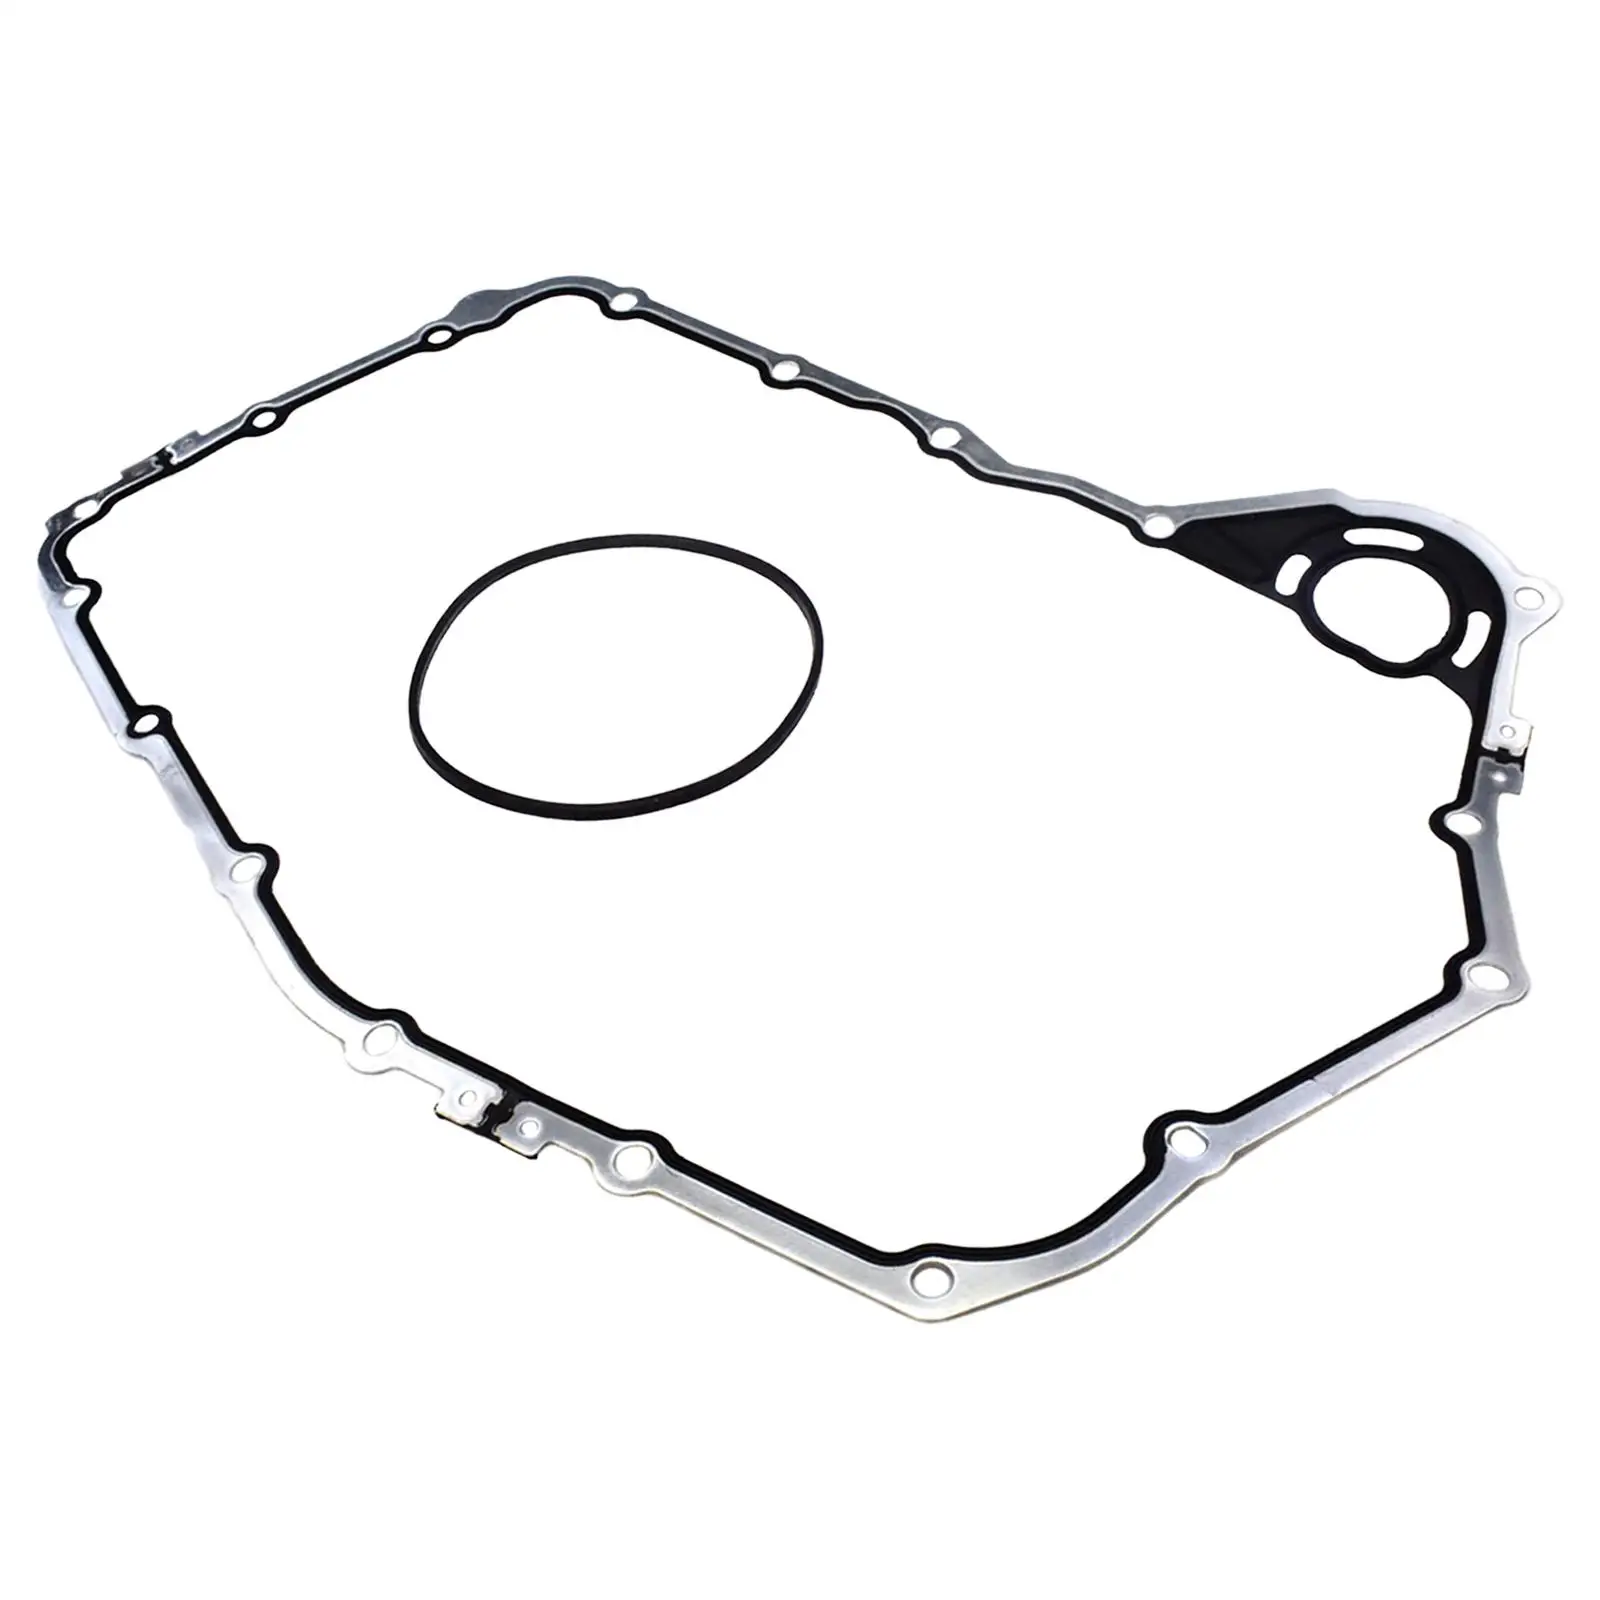 4T65E Engine Automatic Transmission Case Gasket Side Cover Seal Kit for Buick 3.0 2.5/S80 Automotive Accessory Rubber